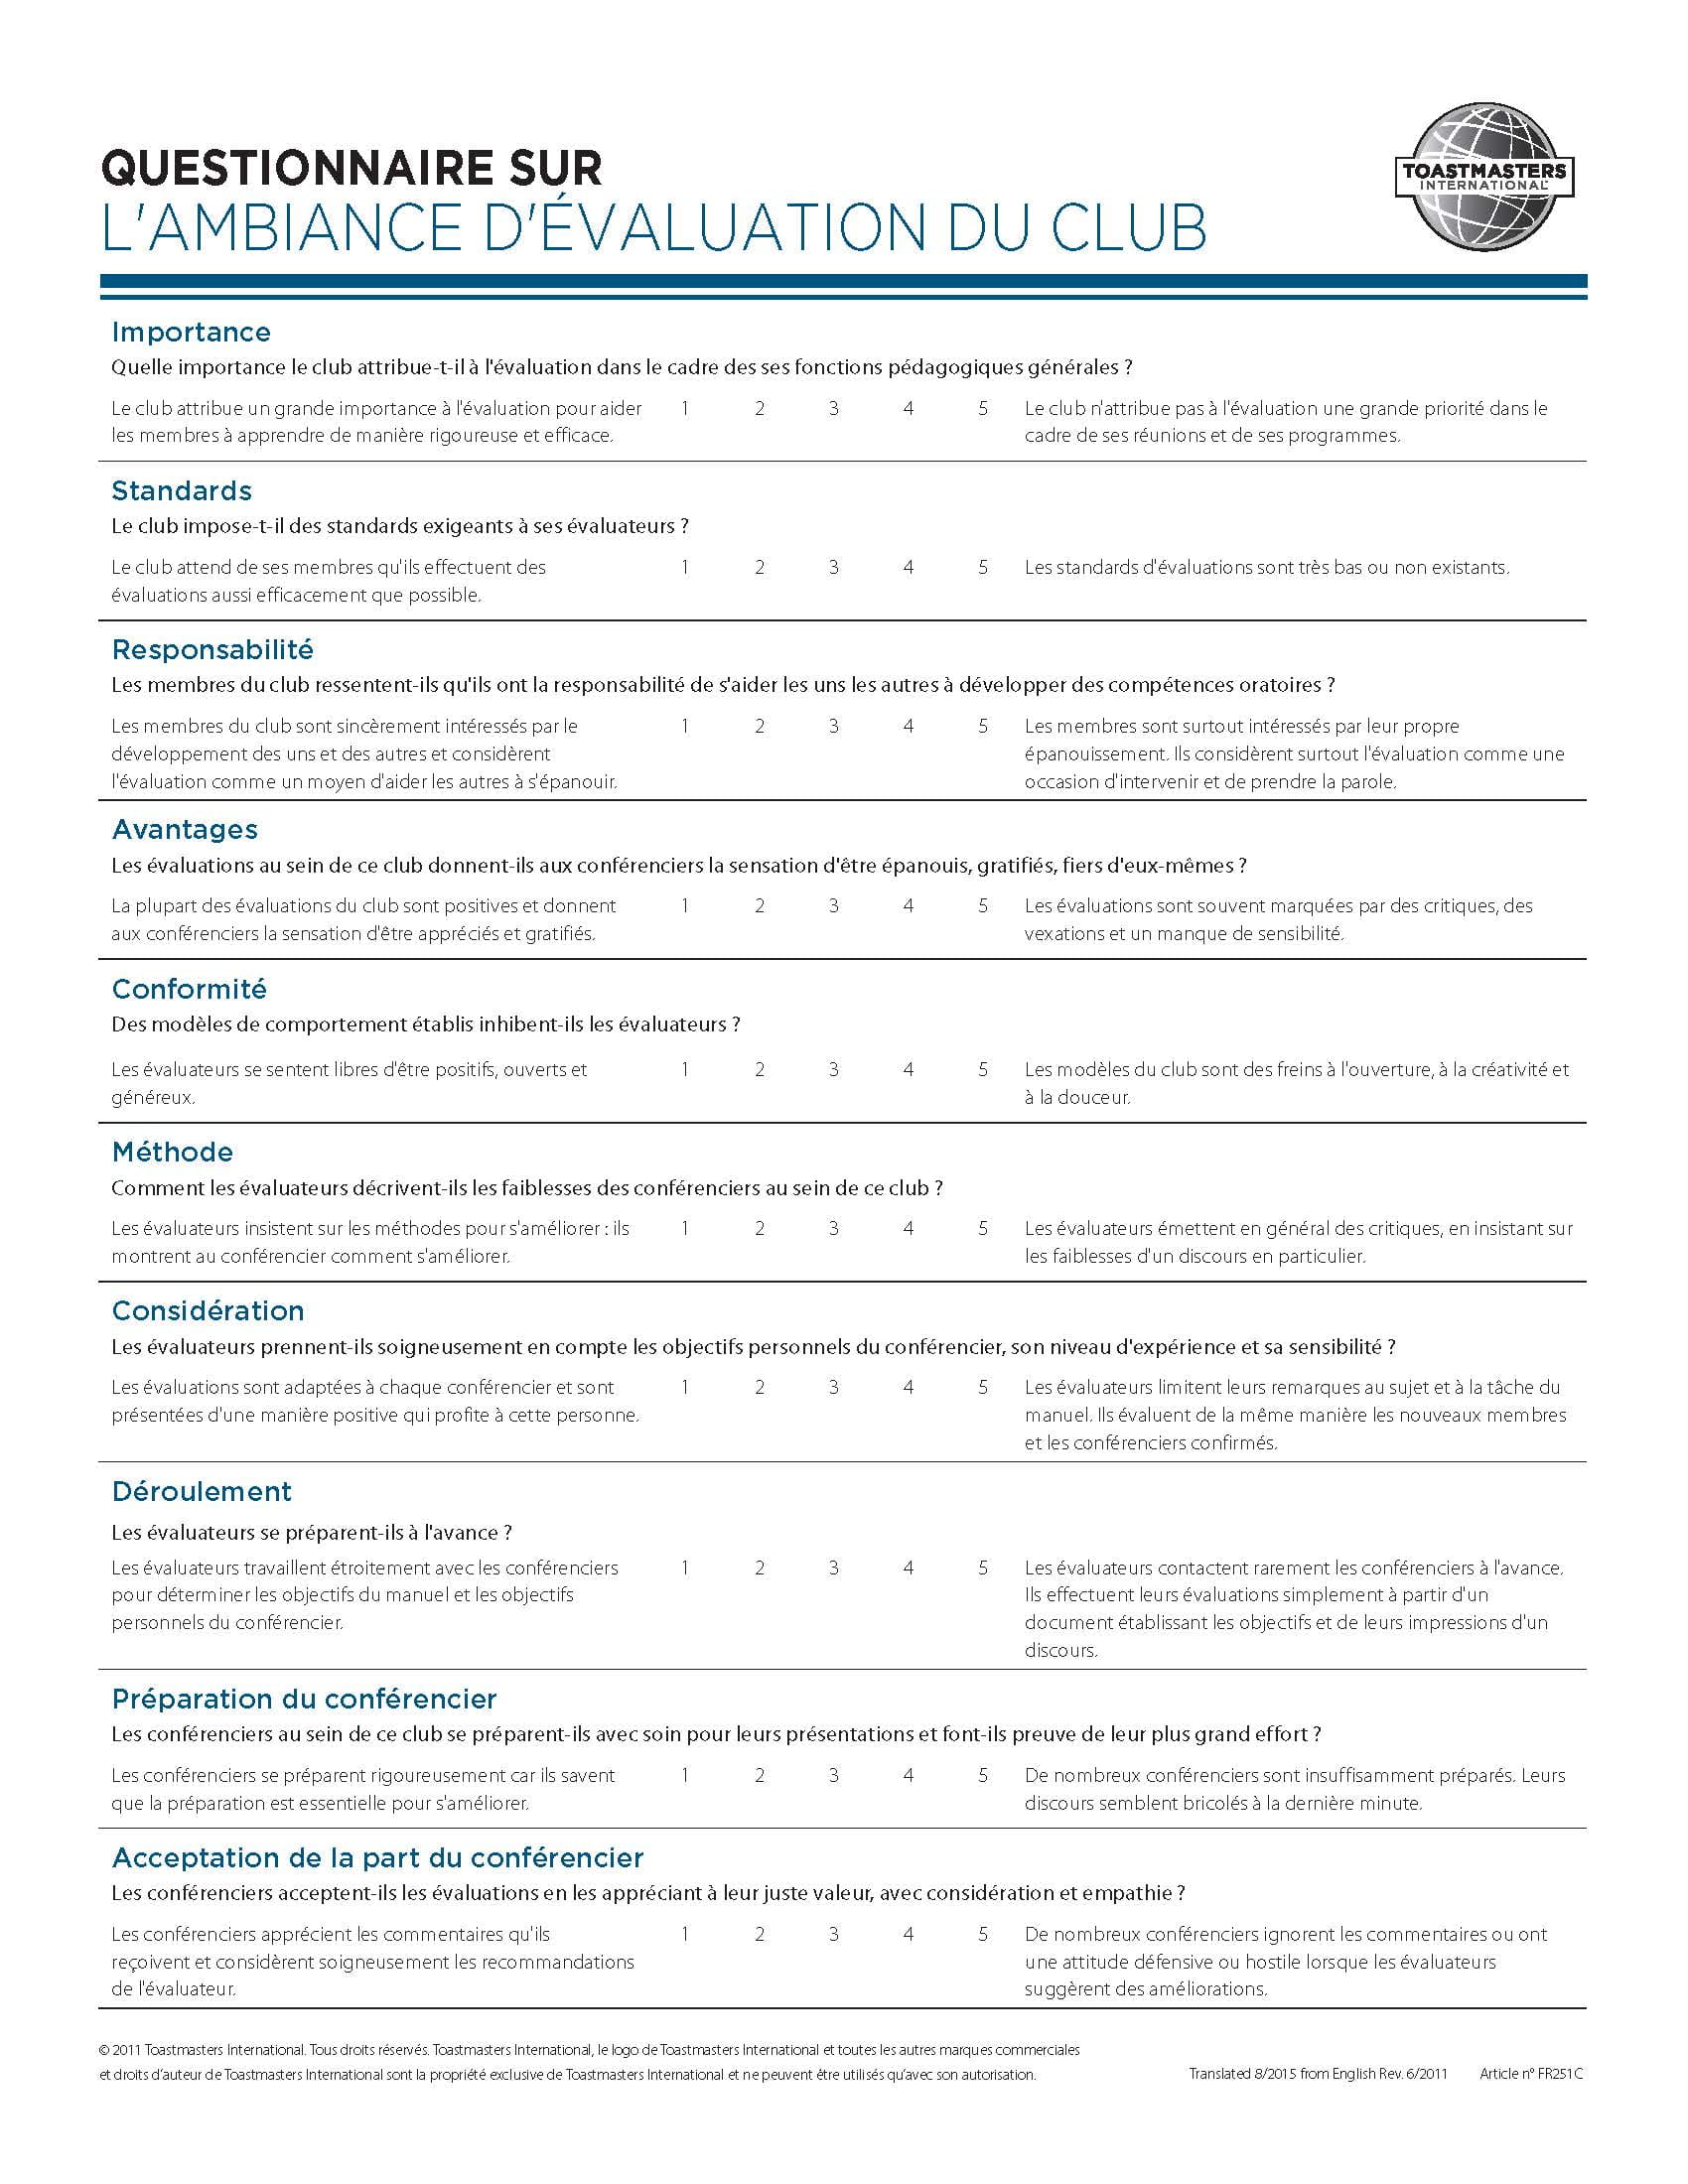 Club Climate Questionnaire (French)